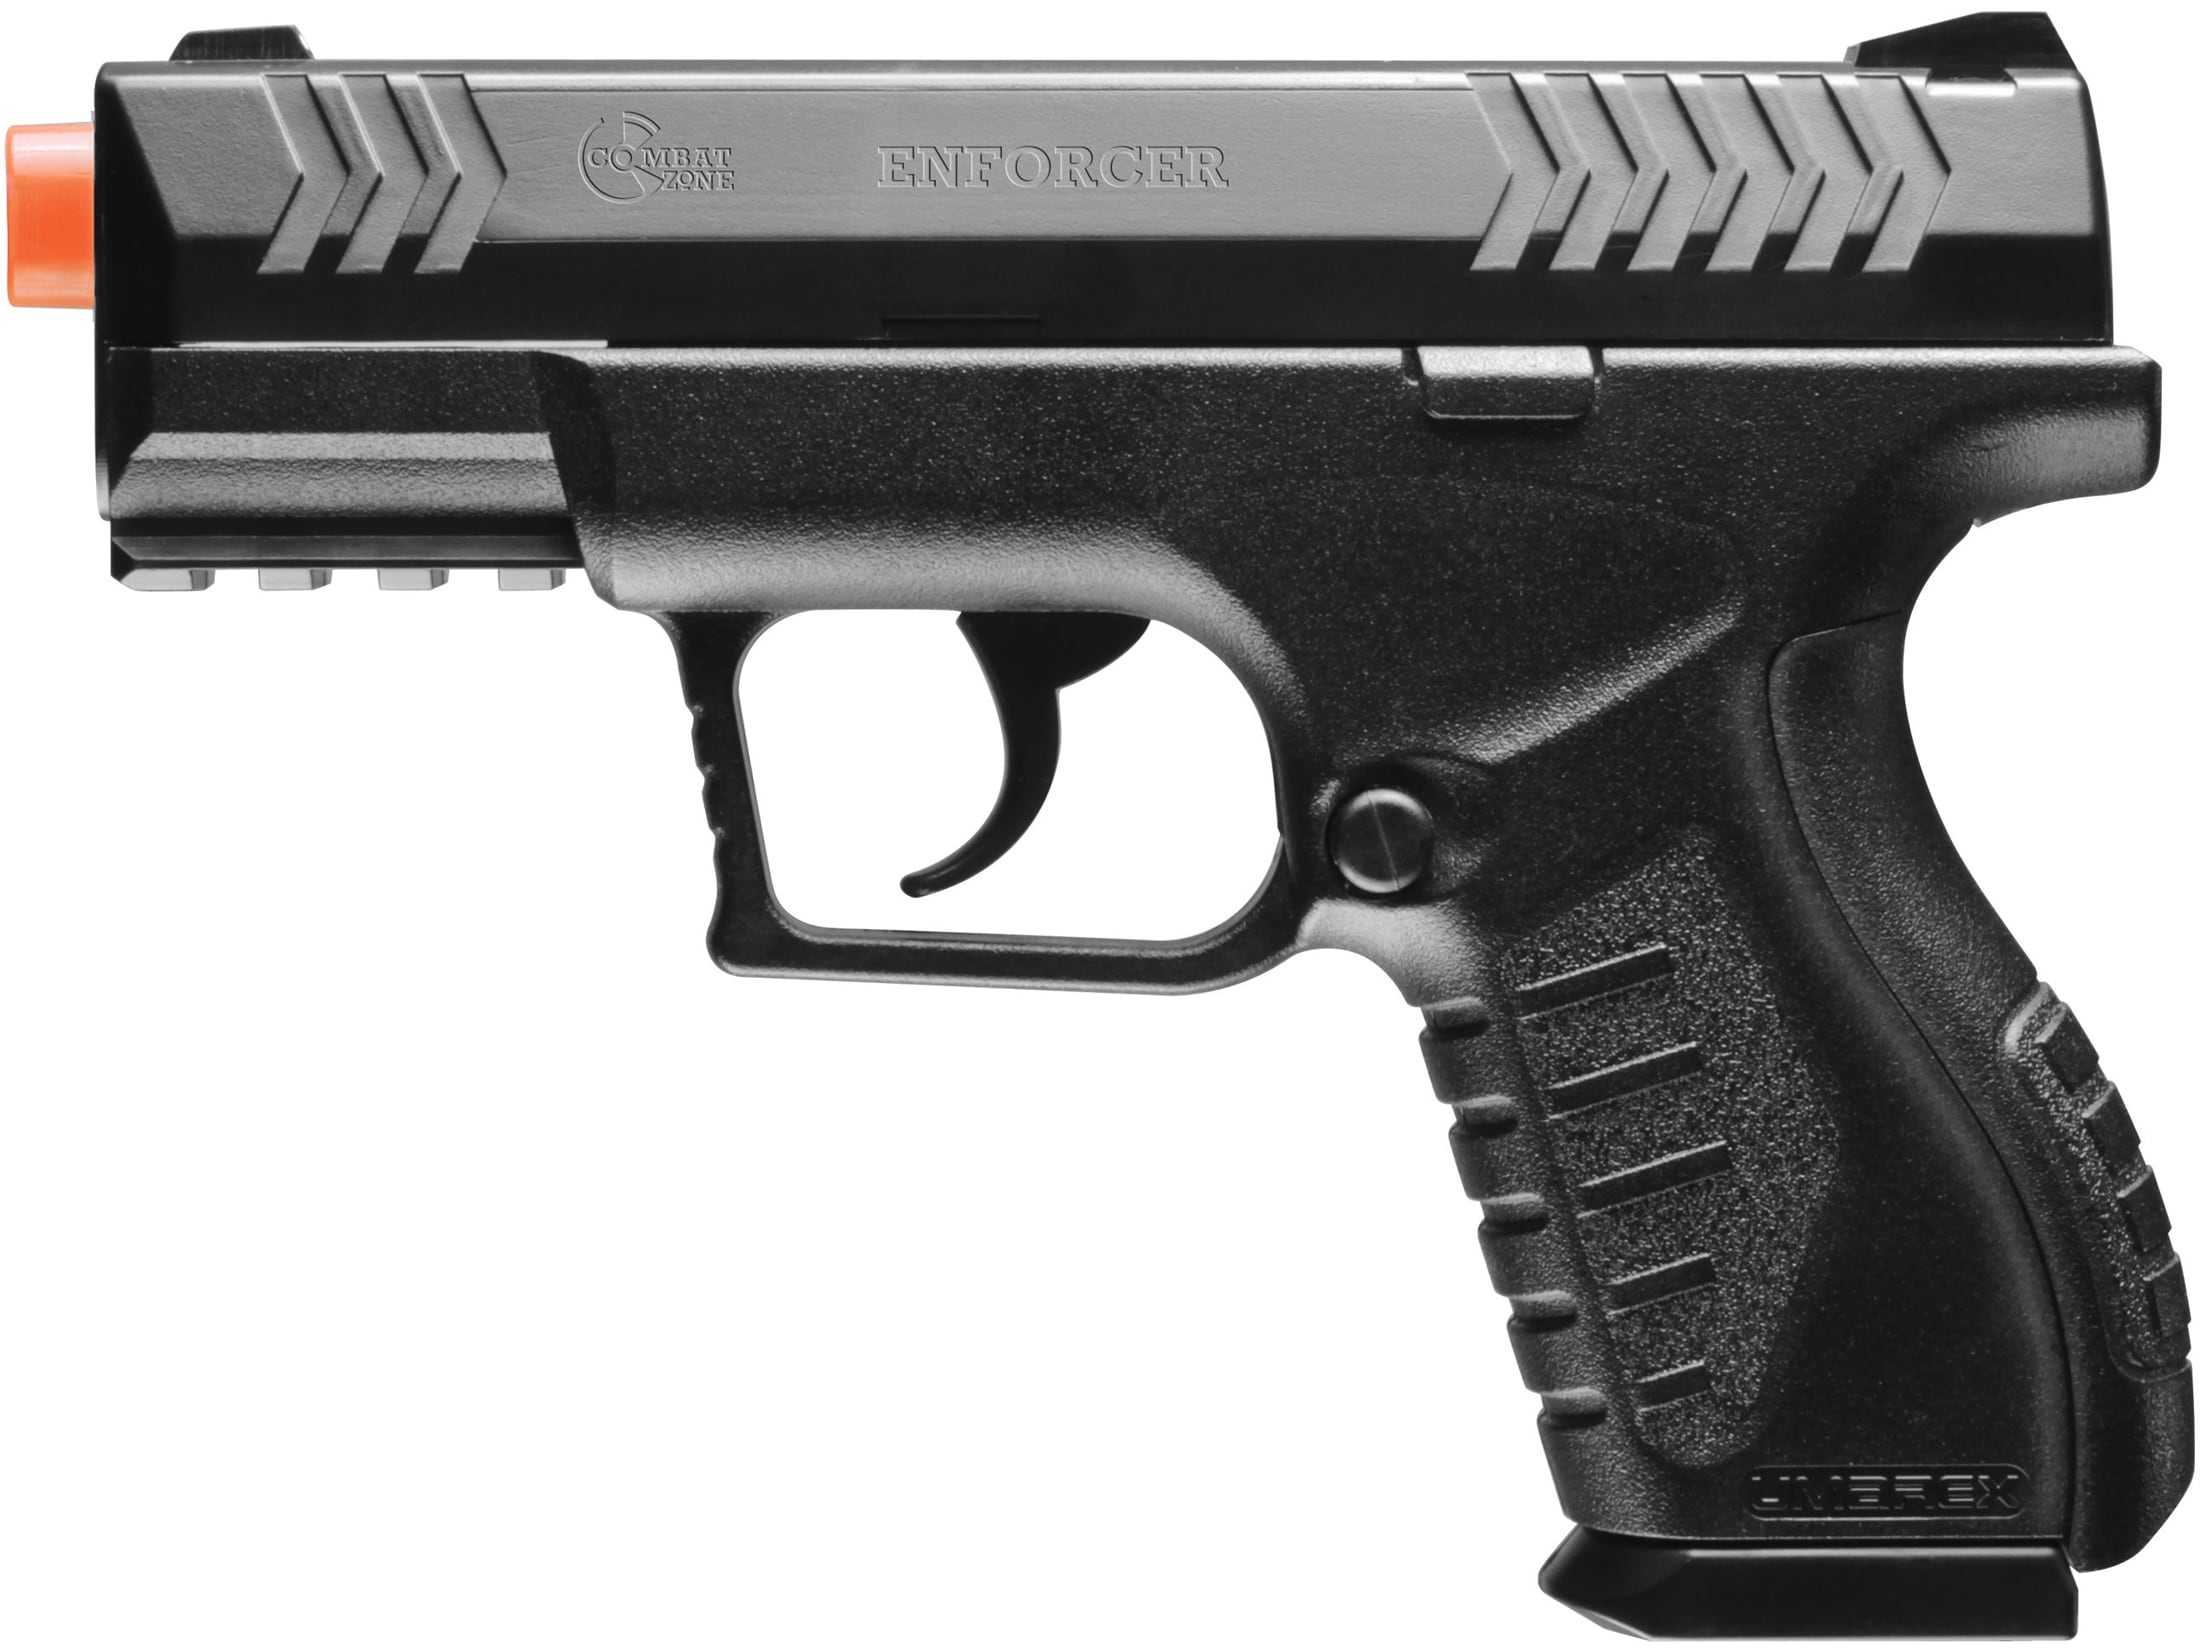 Umarex Combat Zone Enforcer Airsoft Pistol 6mm BB CO2 Powered Semi-Automatic Black For Sale